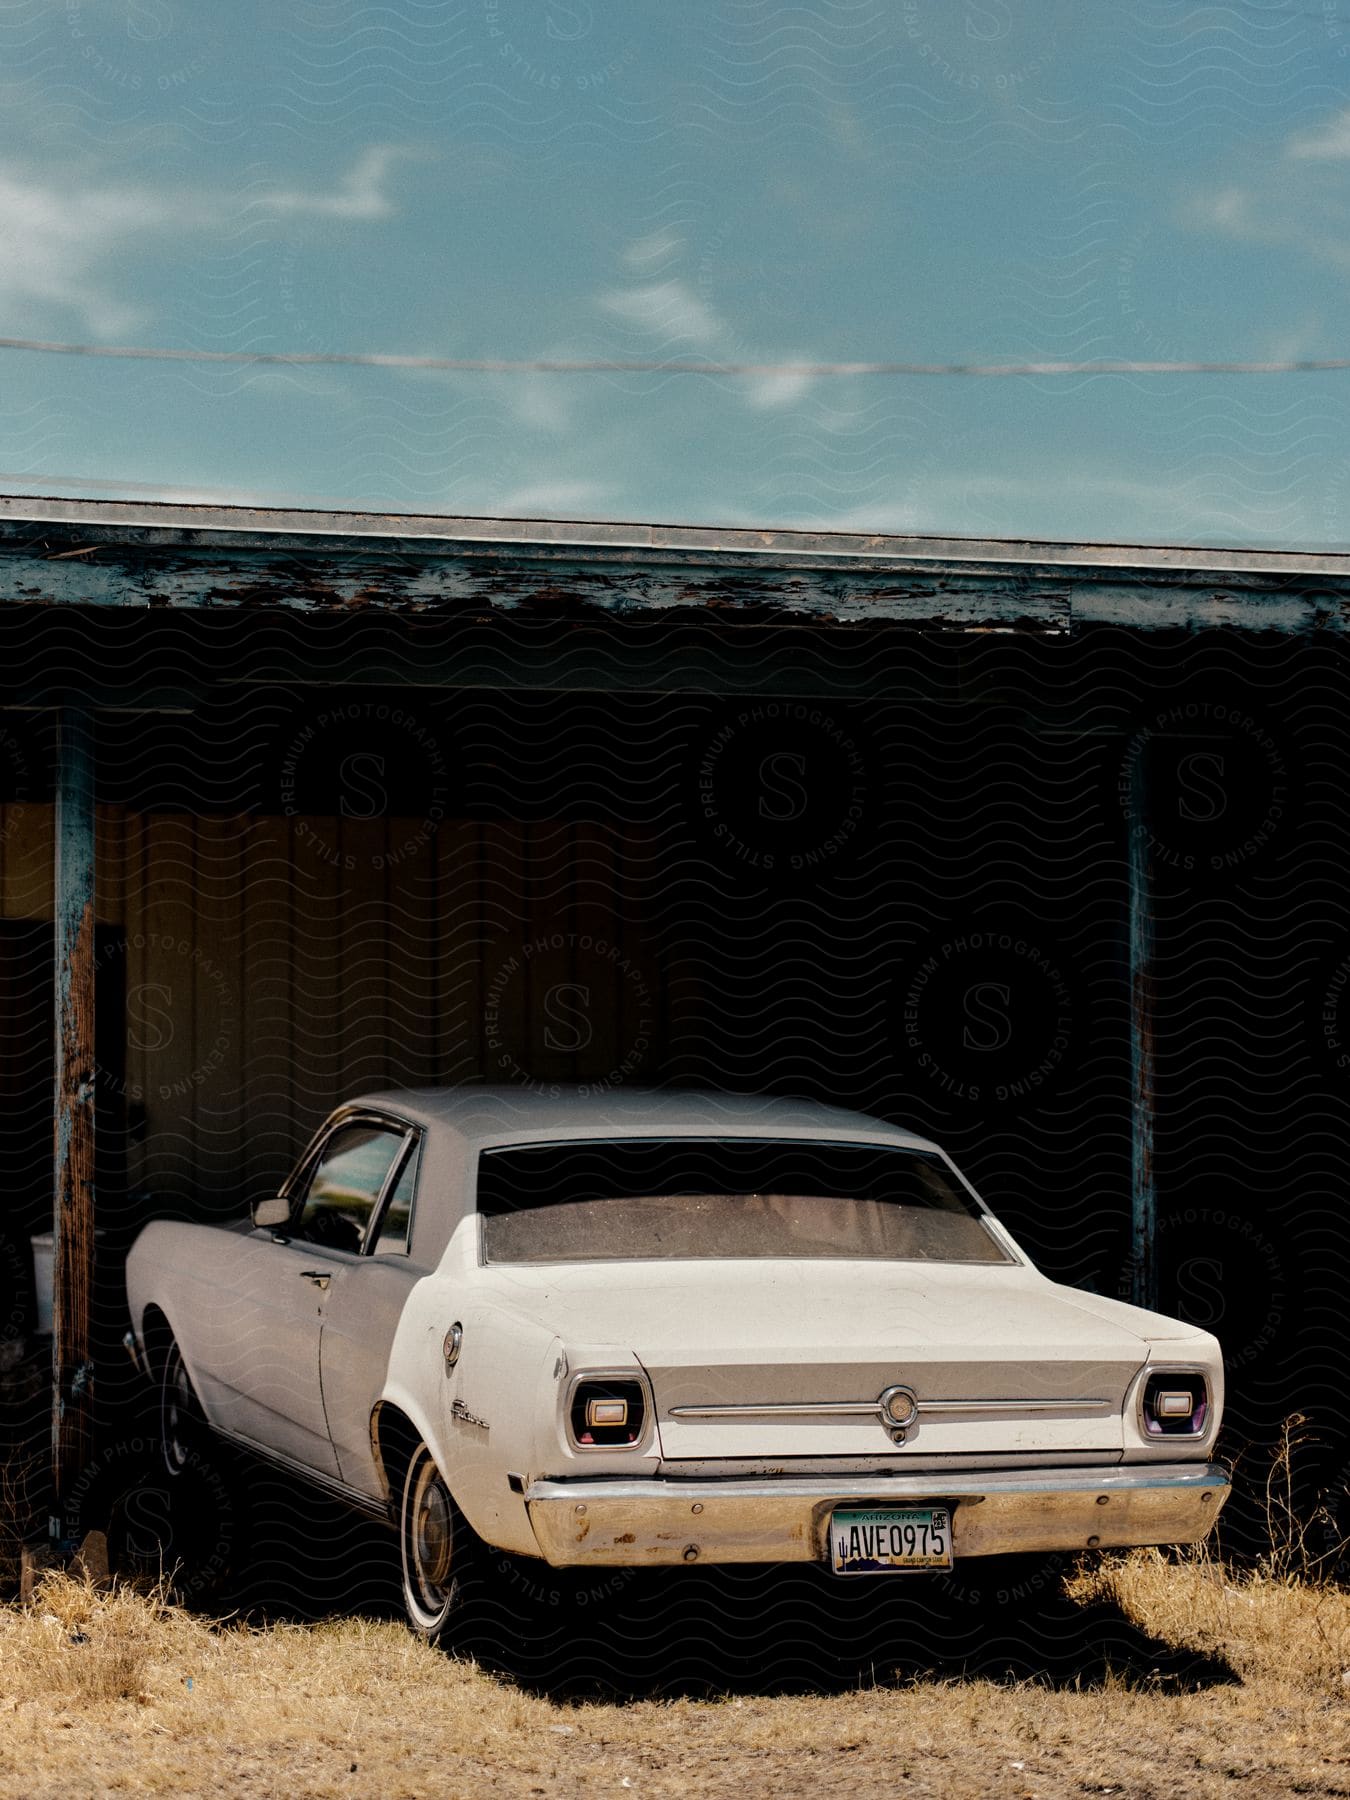 White Ford Falcon parked in a garage.